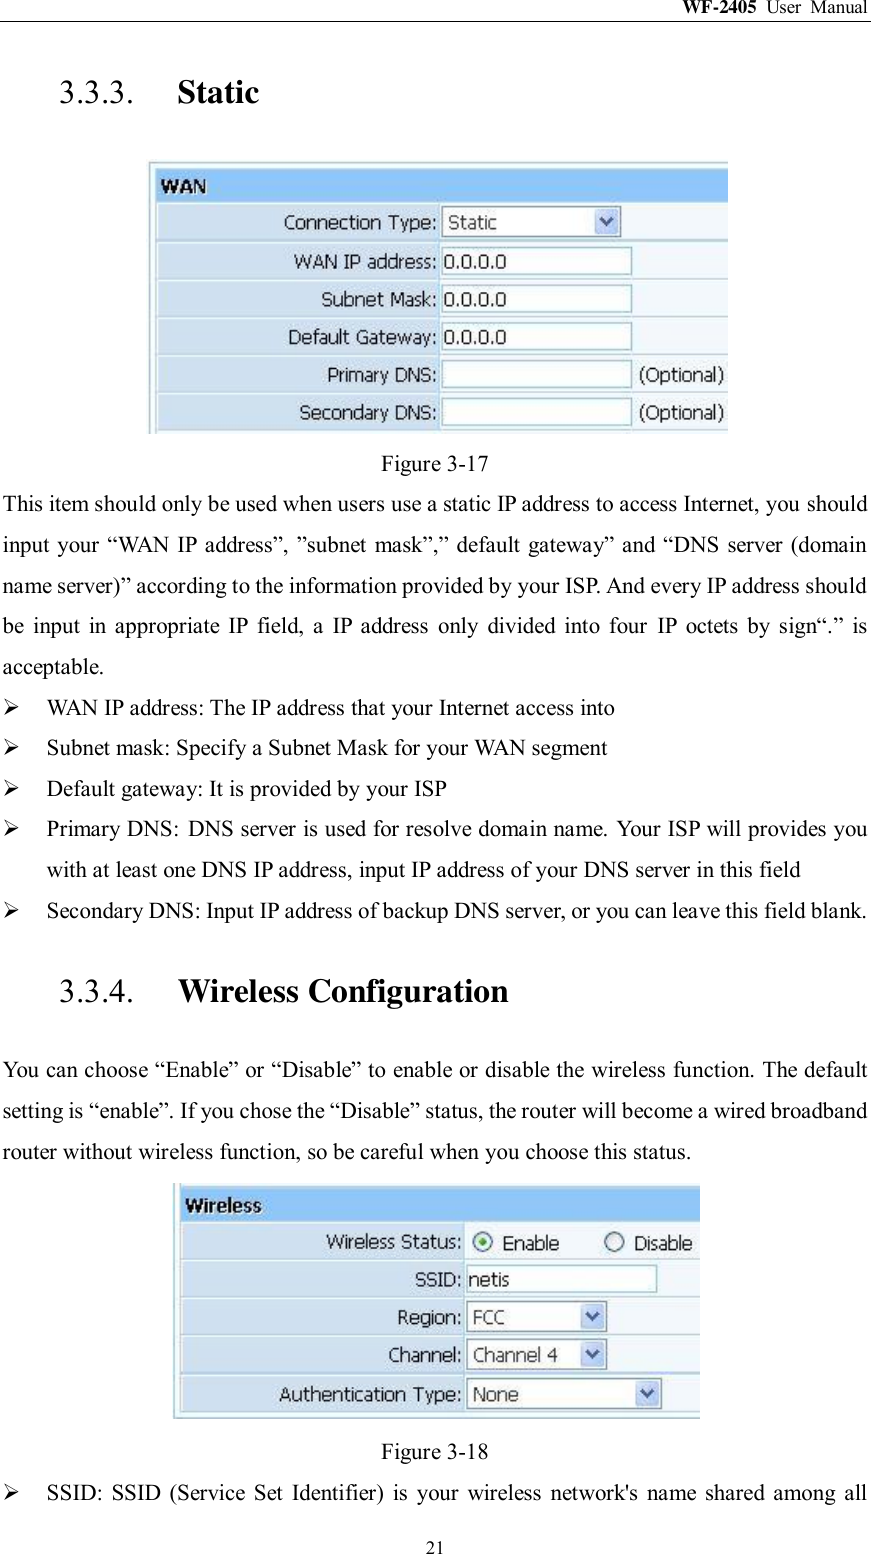 WF-2405  User  Manual  21 3.3.3. Static  Figure 3-17 This item should only be used when users use a static IP address to access Internet, you should input your “WAN IP address”,  ”subnet mask”,” default gateway” and “DNS server (domain name server)” according to the information provided by your ISP. And every IP address should be  input  in  appropriate  IP  field,  a  IP  address  only  divided  into  four  IP  octets  by  sign“.”  is acceptable.  WAN IP address: The IP address that your Internet access into  Subnet mask: Specify a Subnet Mask for your WAN segment  Default gateway: It is provided by your ISP  Primary DNS:  DNS server is used for resolve domain name. Your ISP will provides you with at least one DNS IP address, input IP address of your DNS server in this field  Secondary DNS: Input IP address of backup DNS server, or you can leave this field blank. 3.3.4. Wireless Configuration You can choose “Enable” or “Disable” to enable or disable the wireless function. The default setting is “enable”. If you chose the “Disable” status, the router will become a wired broadband router without wireless function, so be careful when you choose this status.  Figure 3-18  SSID:  SSID  (Service  Set  Identifier)  is  your  wireless  network&apos;s  name  shared  among  all 